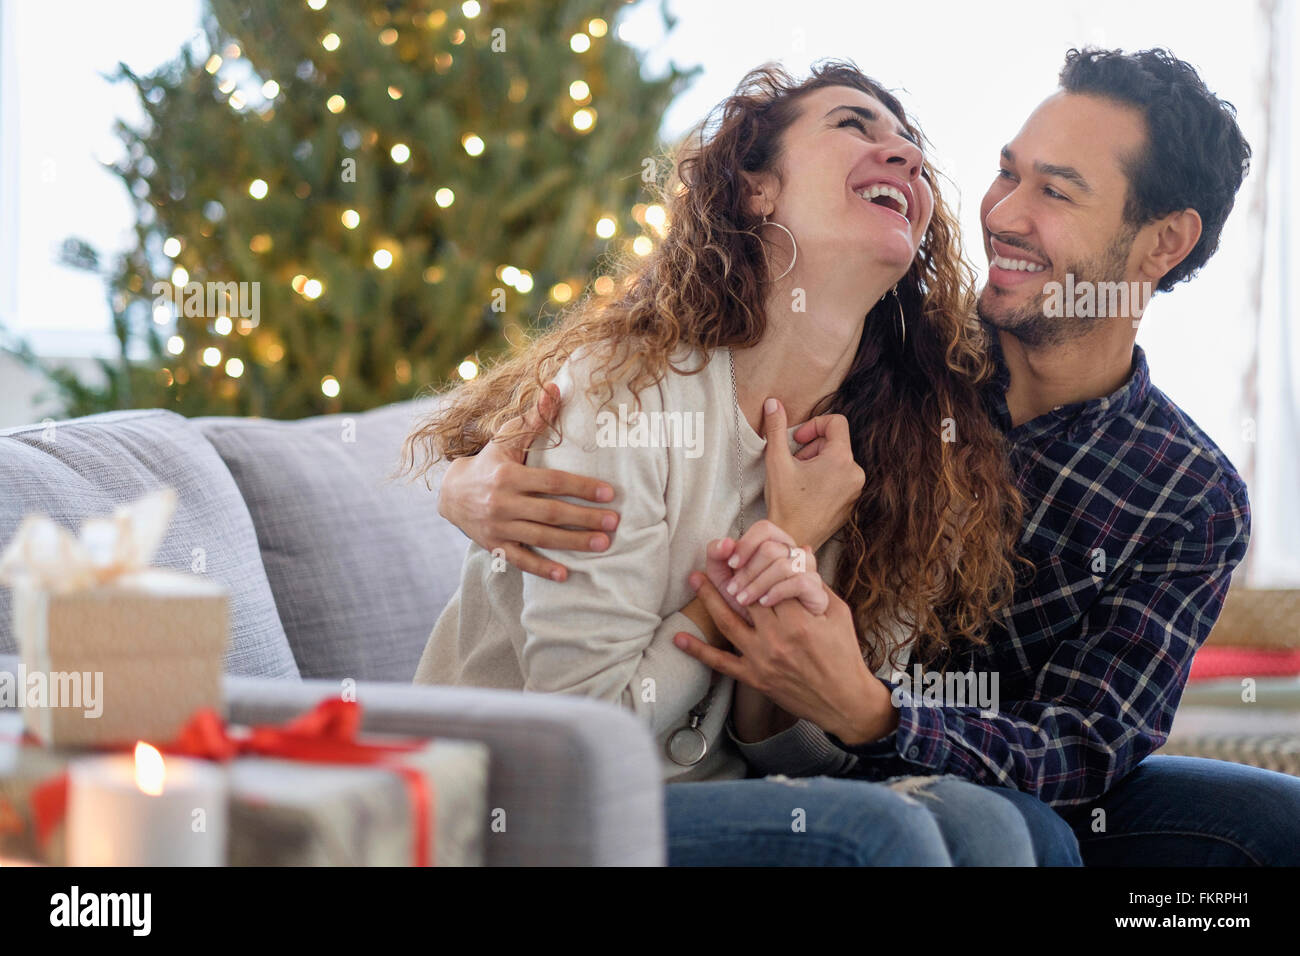 Couple hugging on sofa Banque D'Images